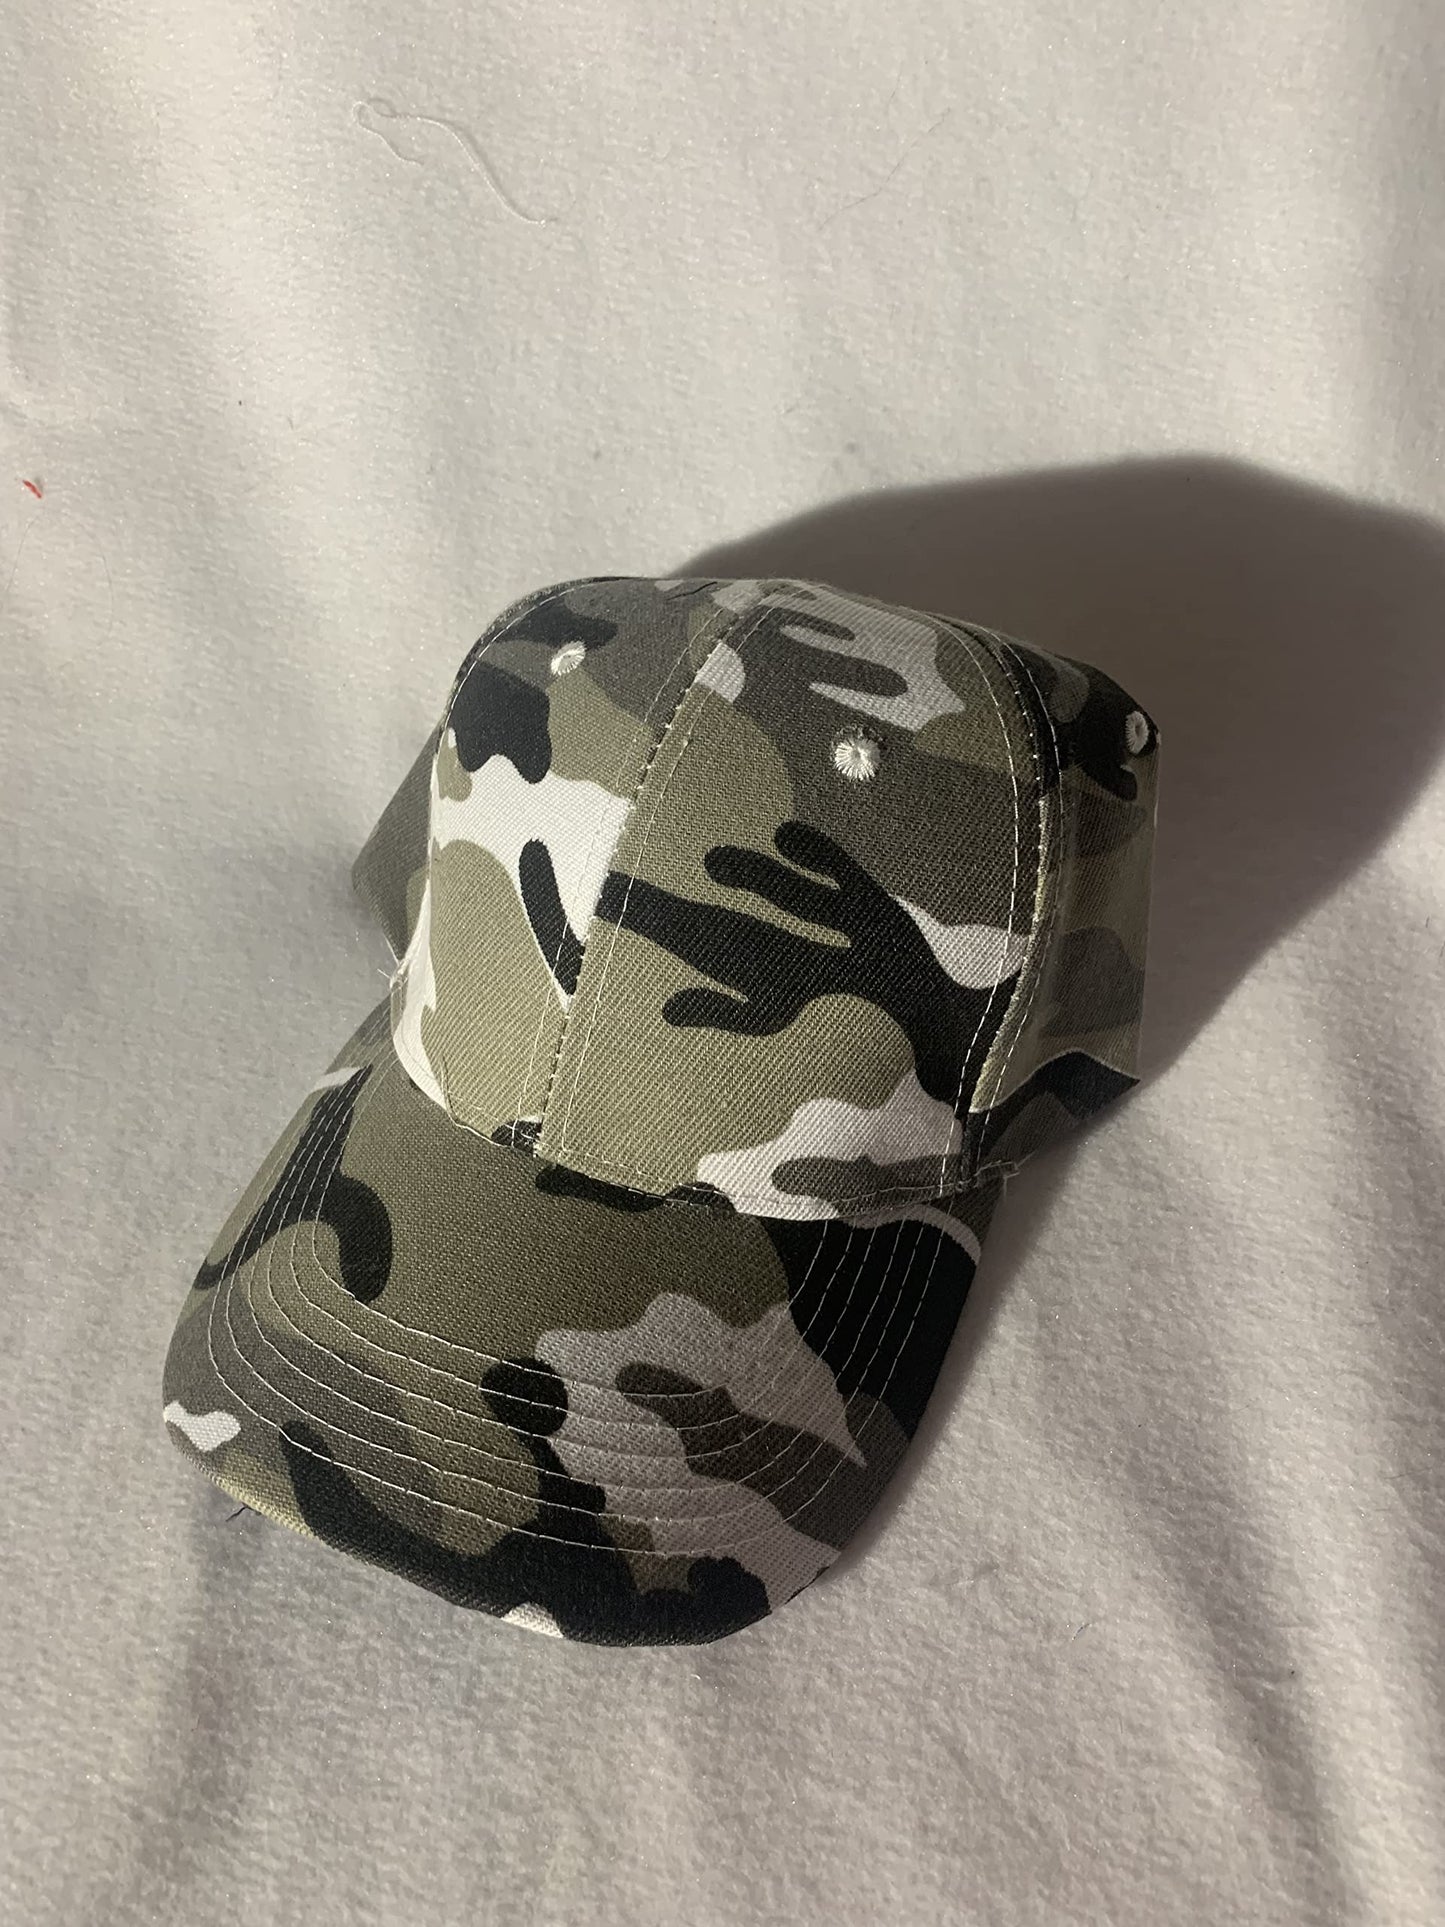 Weighted hat for compression and weight around rim of head, helps with calming, child/adult adjustable weighted baseball cap, black, blue, pink, camoflauge